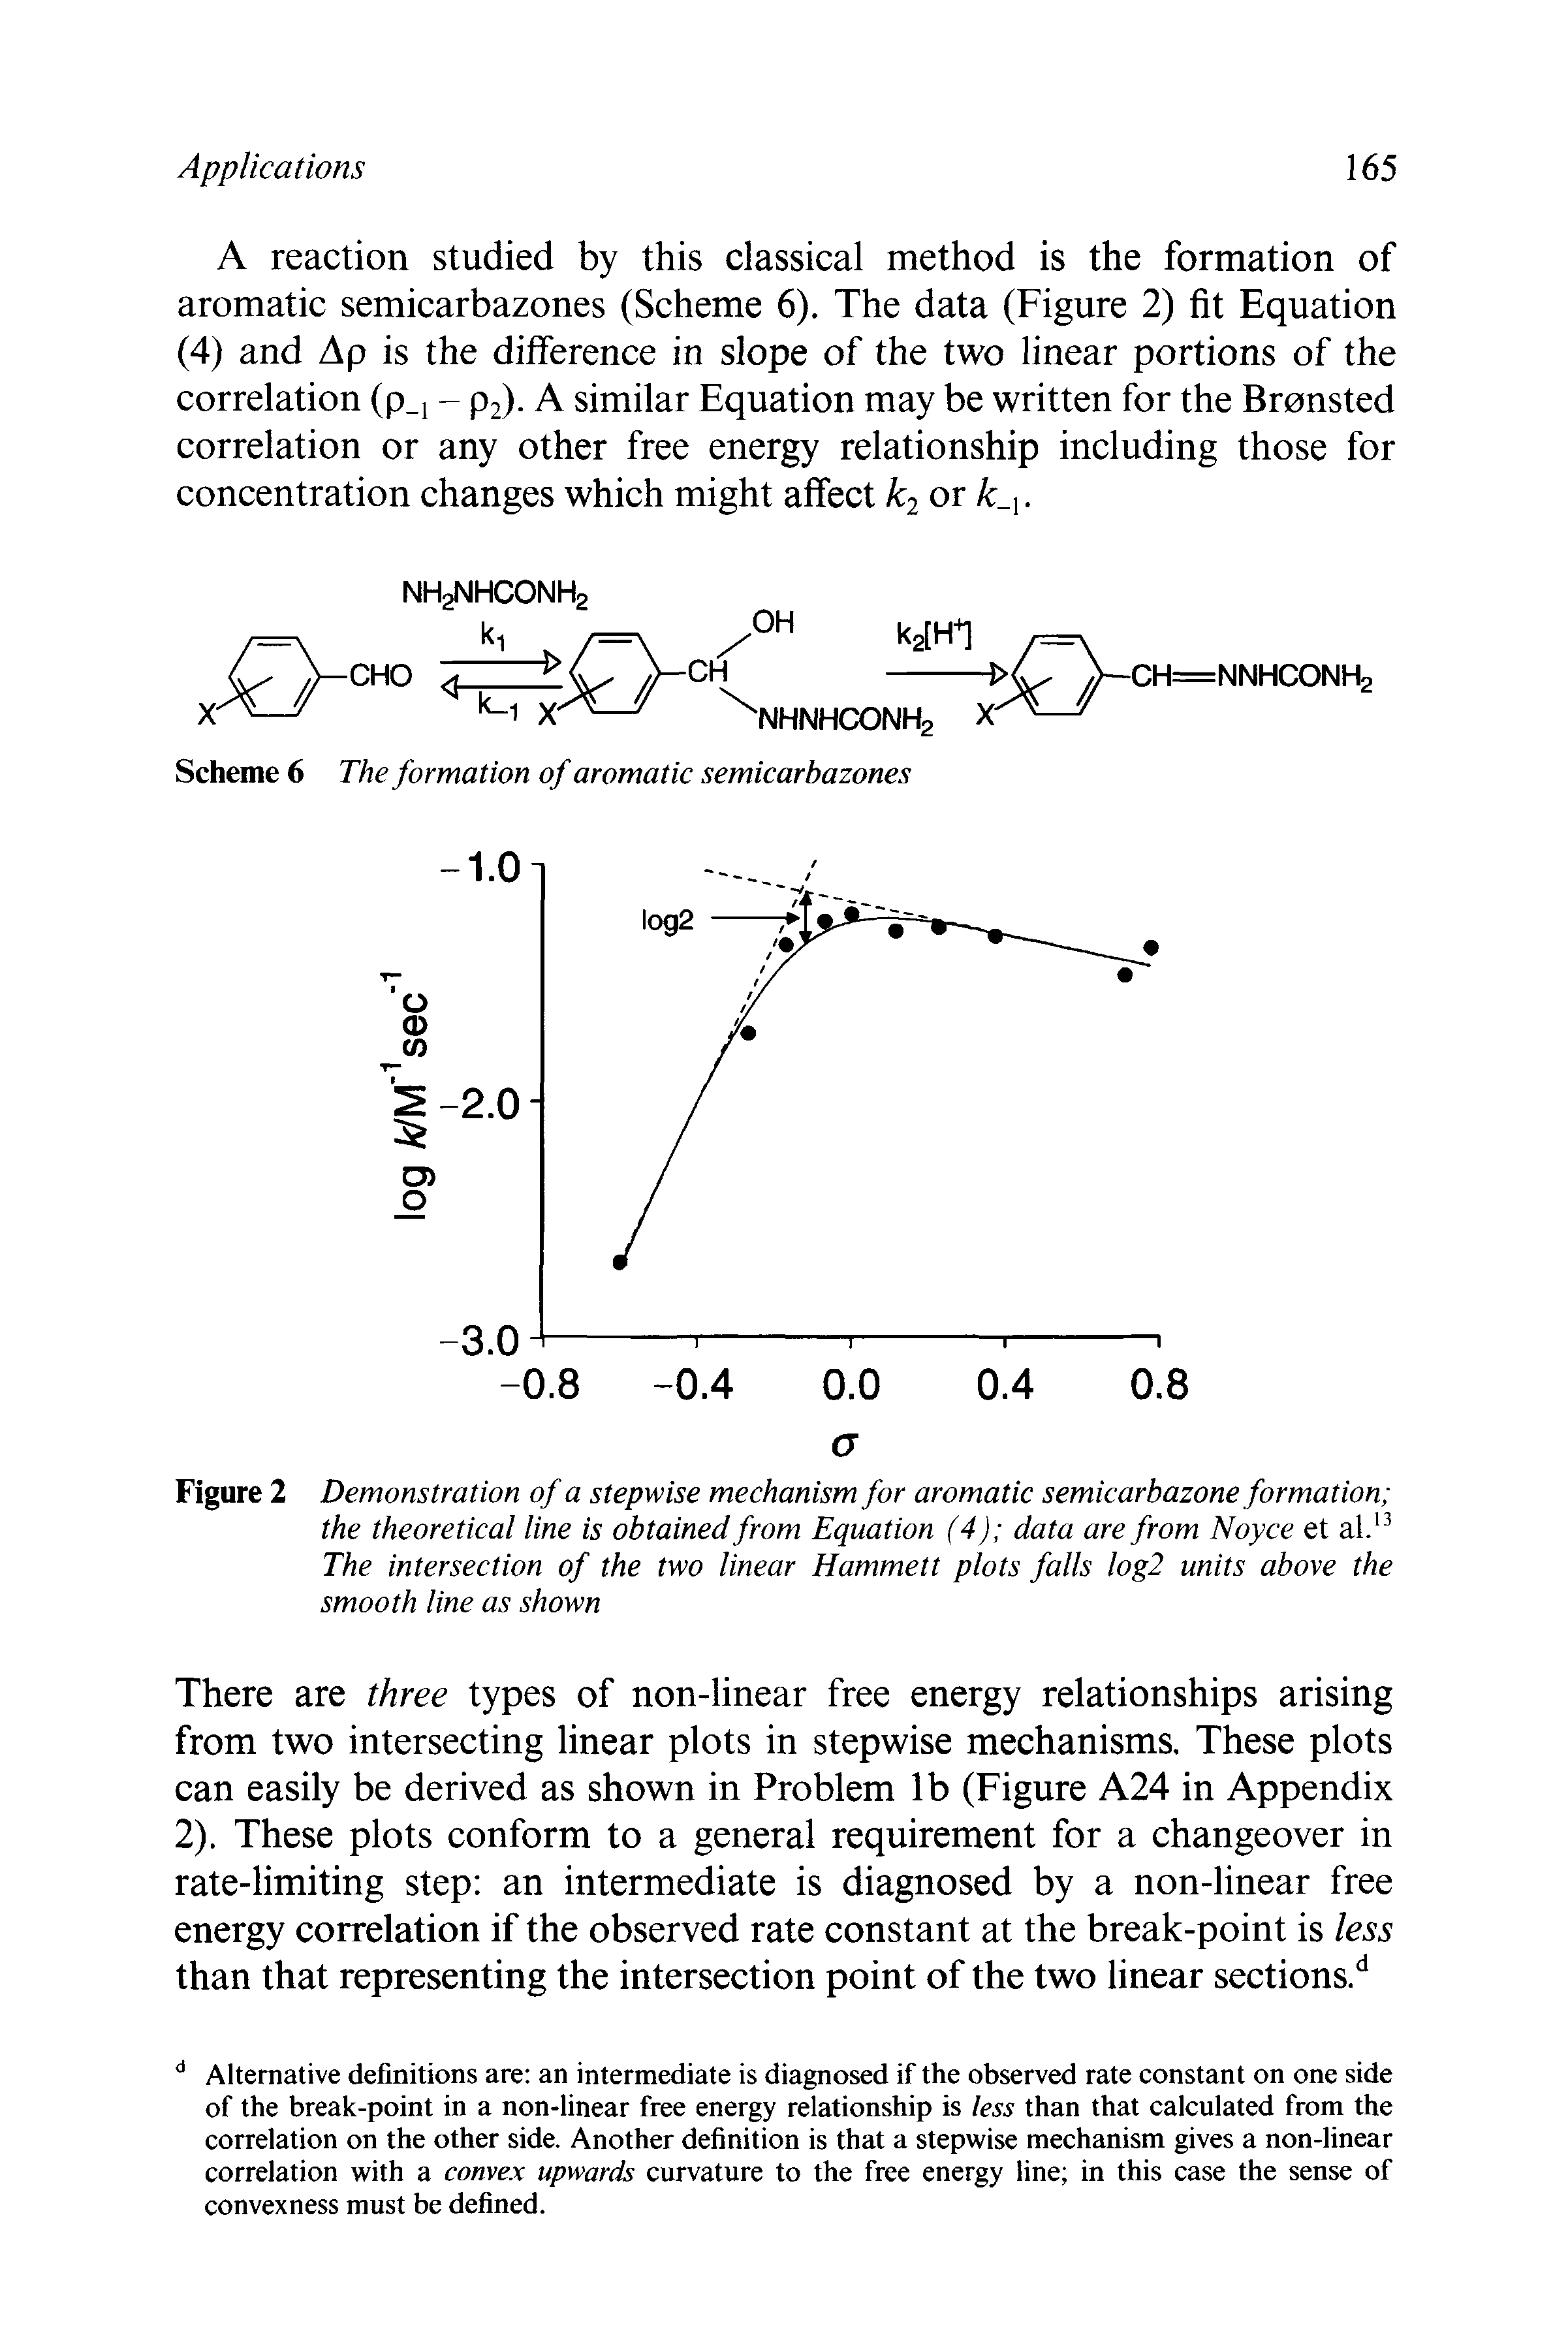 Figure 2 Demonstration of a stepwise mechanism for aromatic semicarbazone formation ...